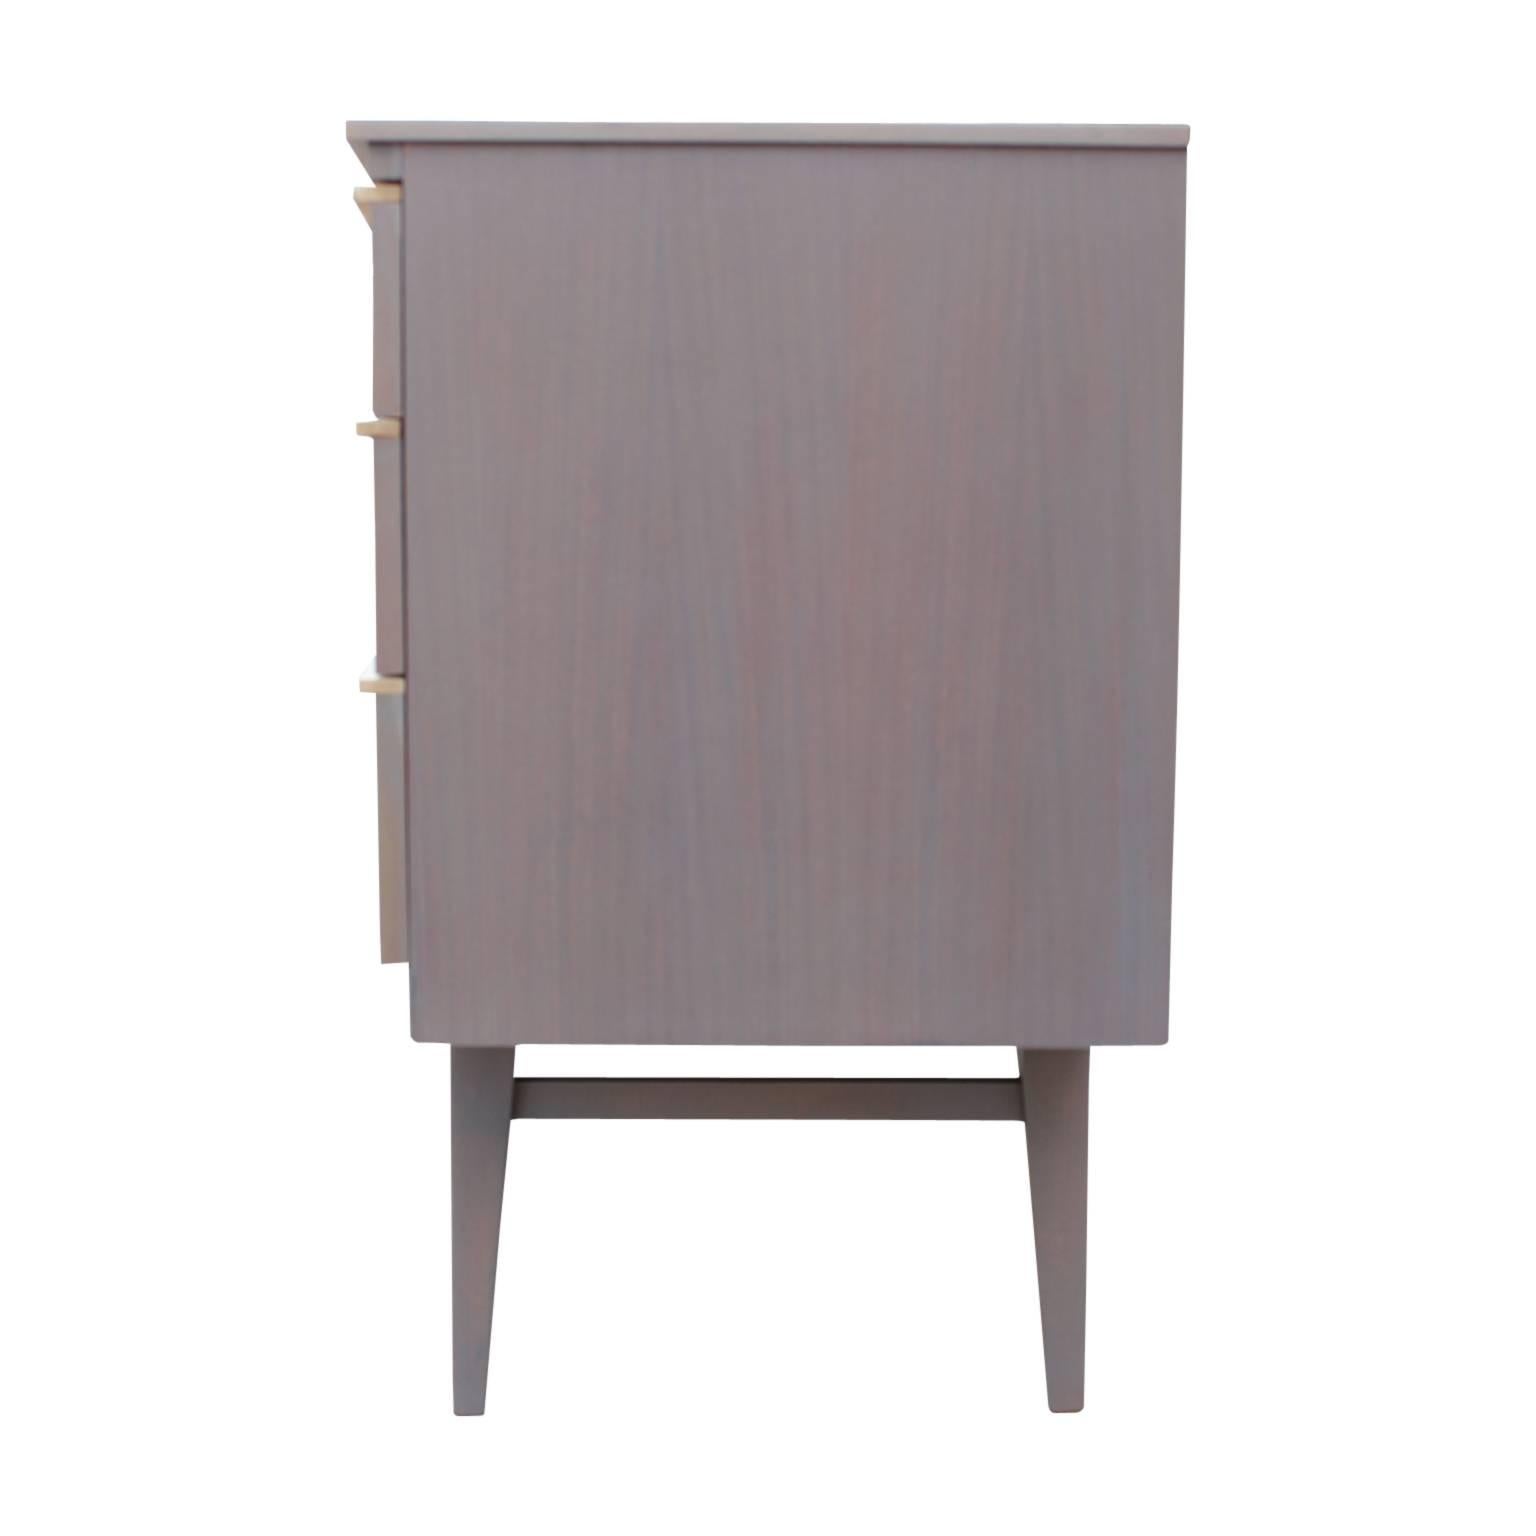 Mid-20th Century Modern Light Grey Credenza / Sideboard with Bleached Wood Accents